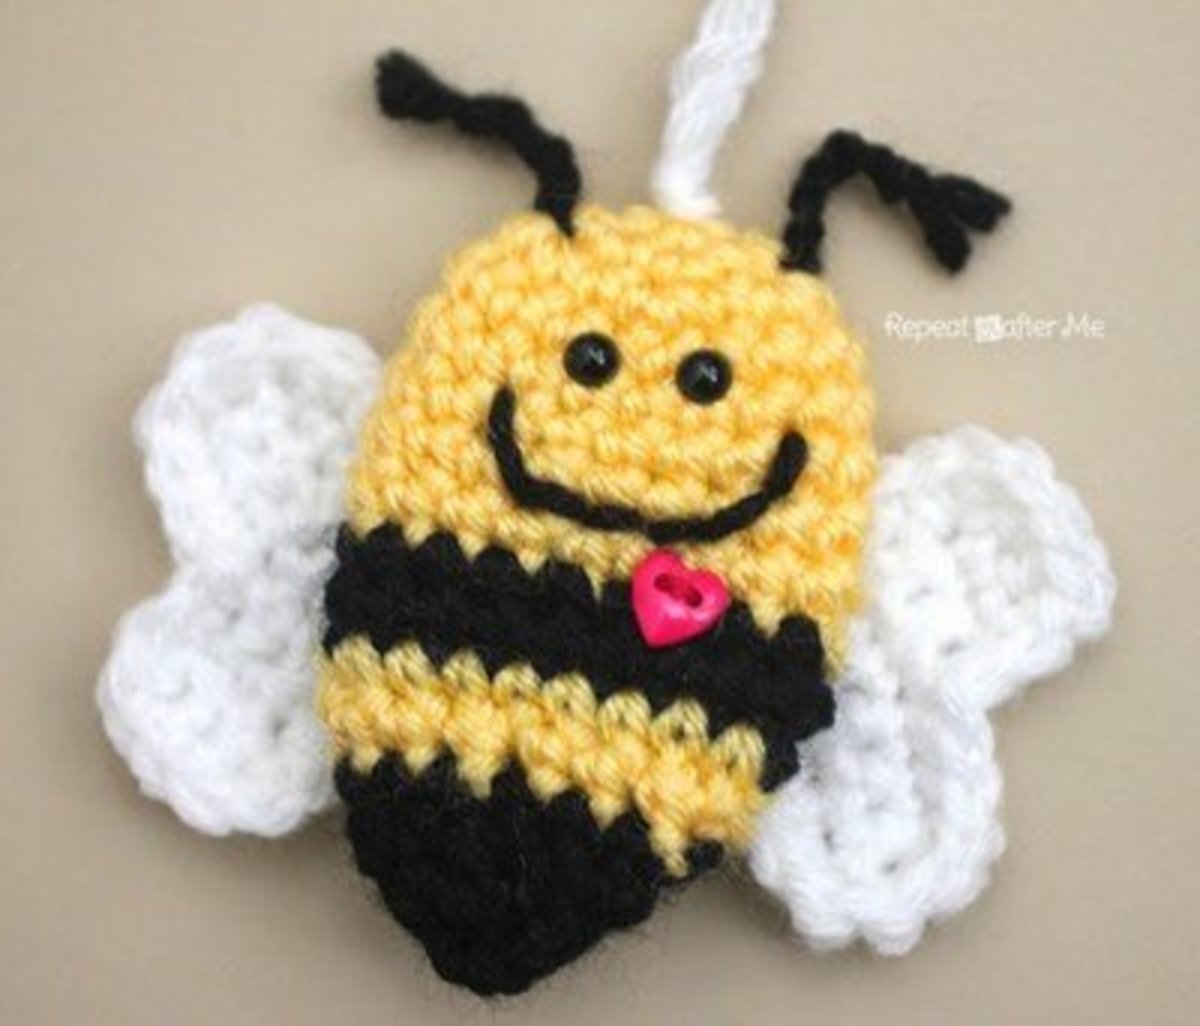 bumblebee-art-and-crafts